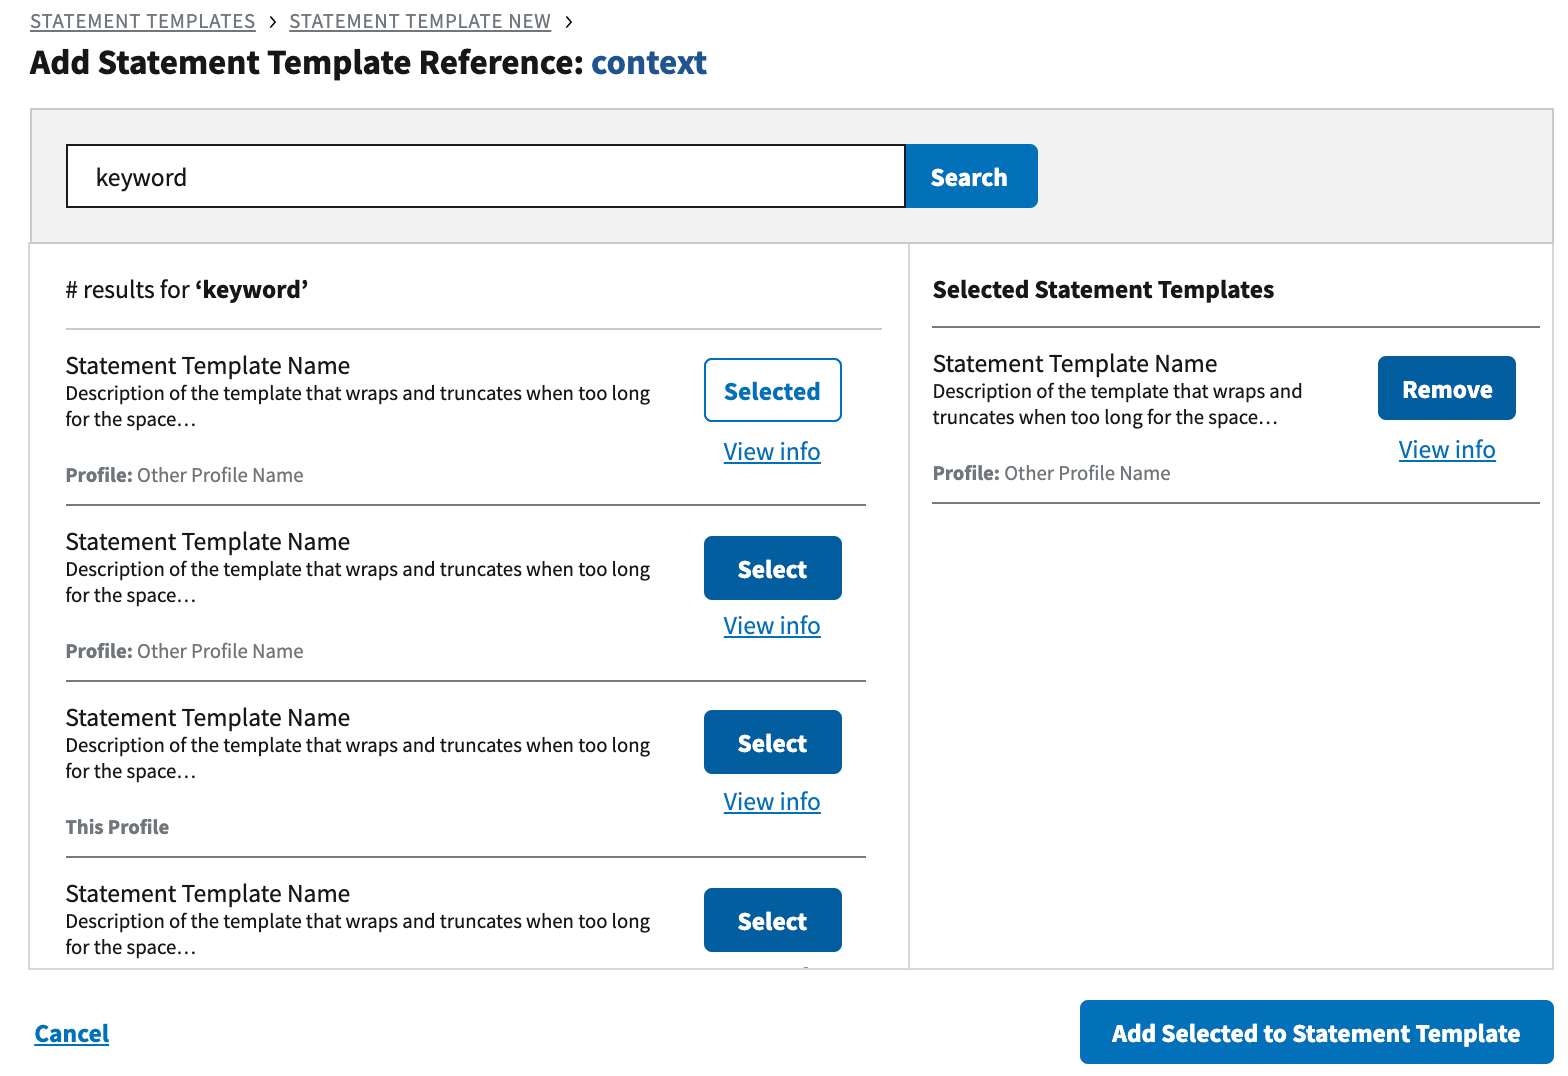 Screenshot of adding statement template reference